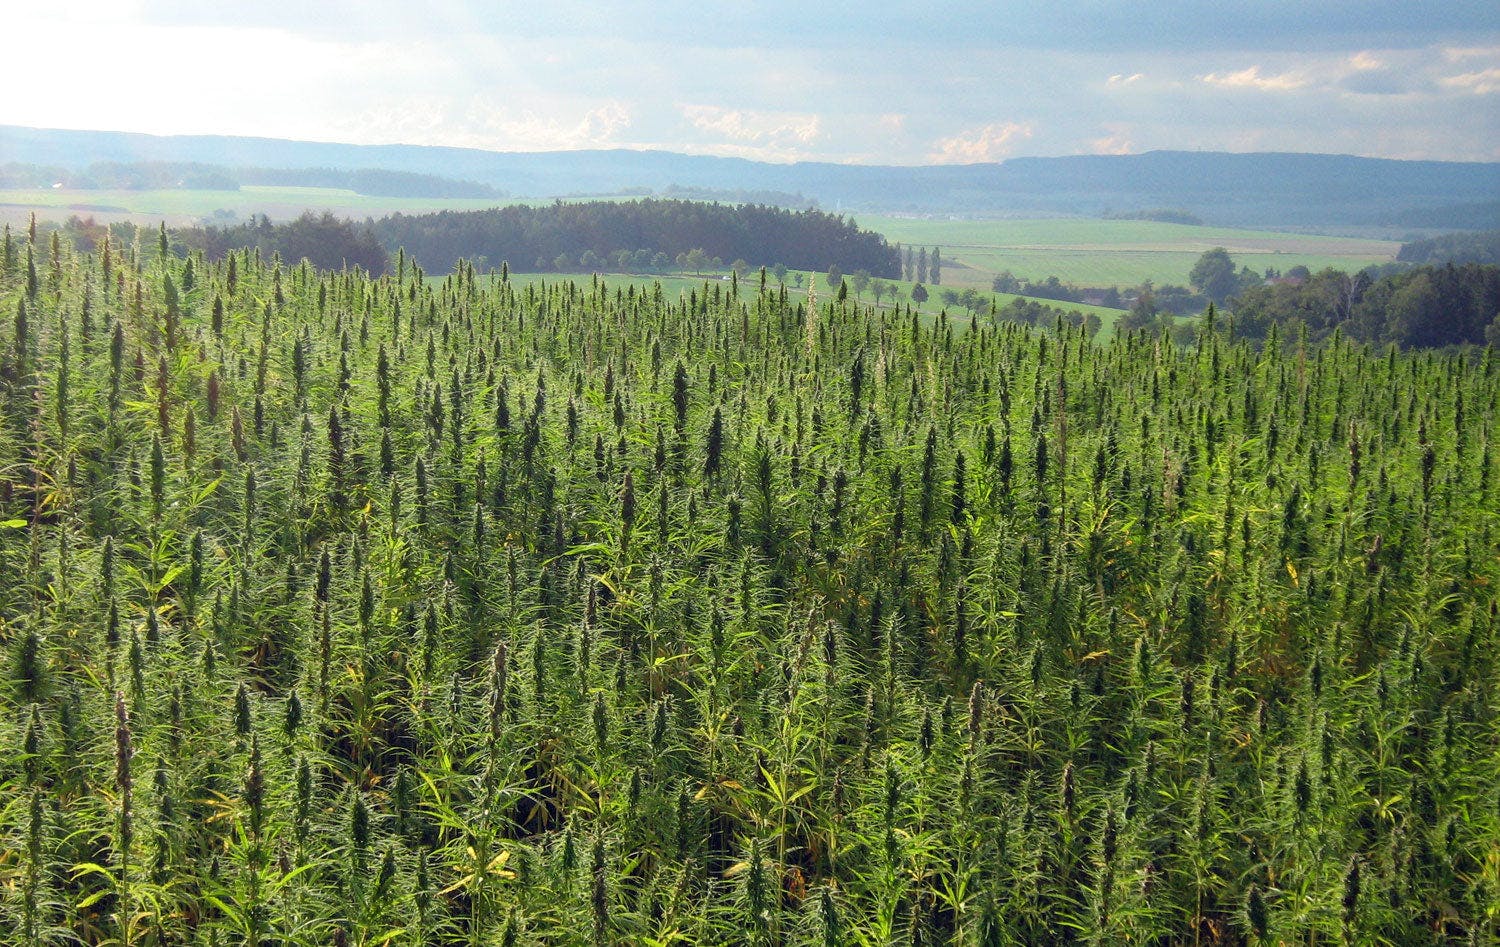 10 Things You Probably Didn’t Know About Hemp